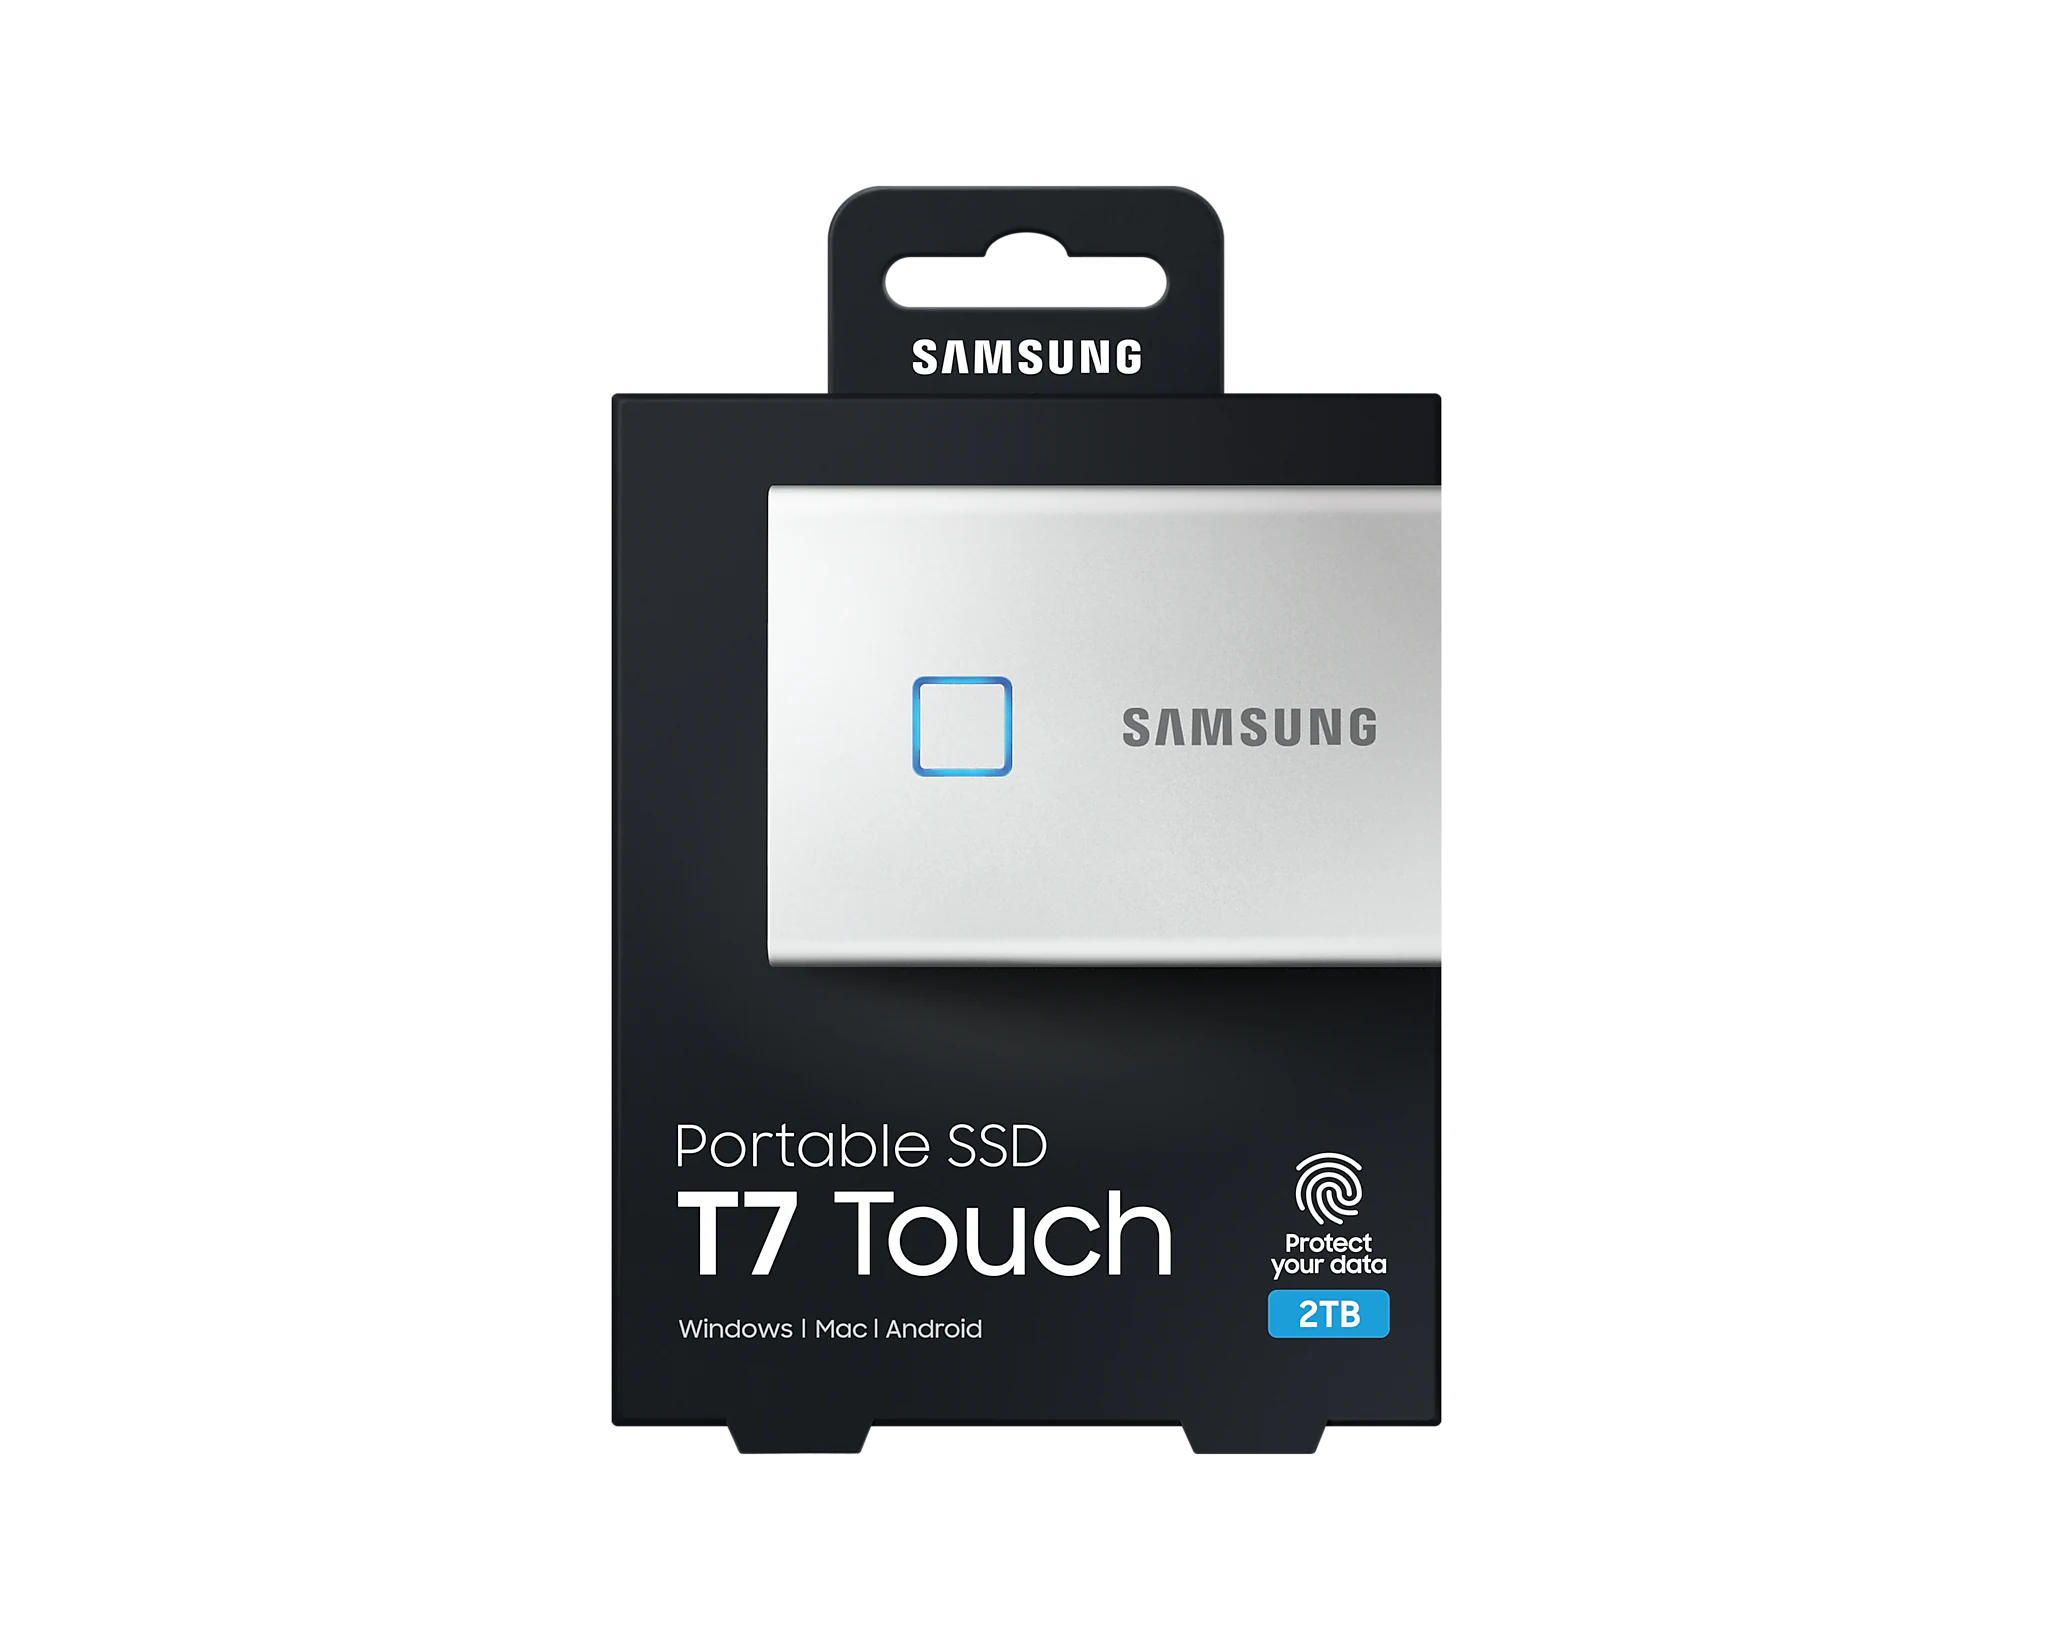 SSD SAMSUNG T7 Touch Portable SSD 2TB - Up to 1050MB/s - USB 3.2